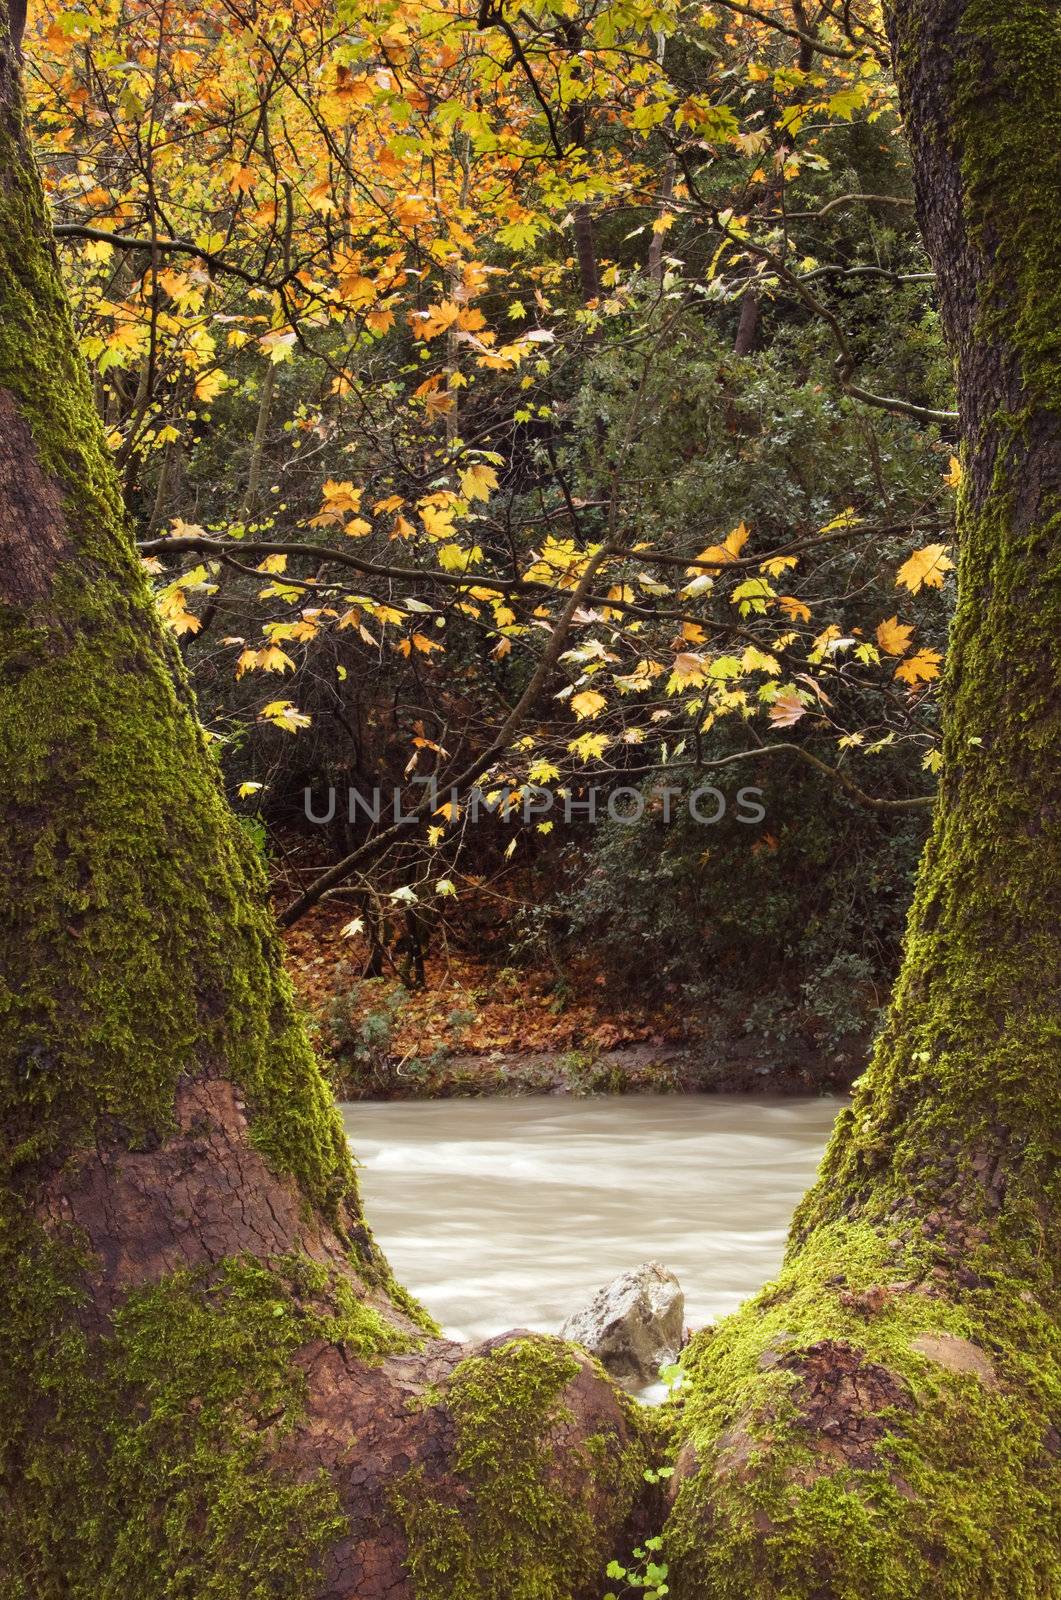 Scene of an autumn forest and water stream framed through a V-shaped tree